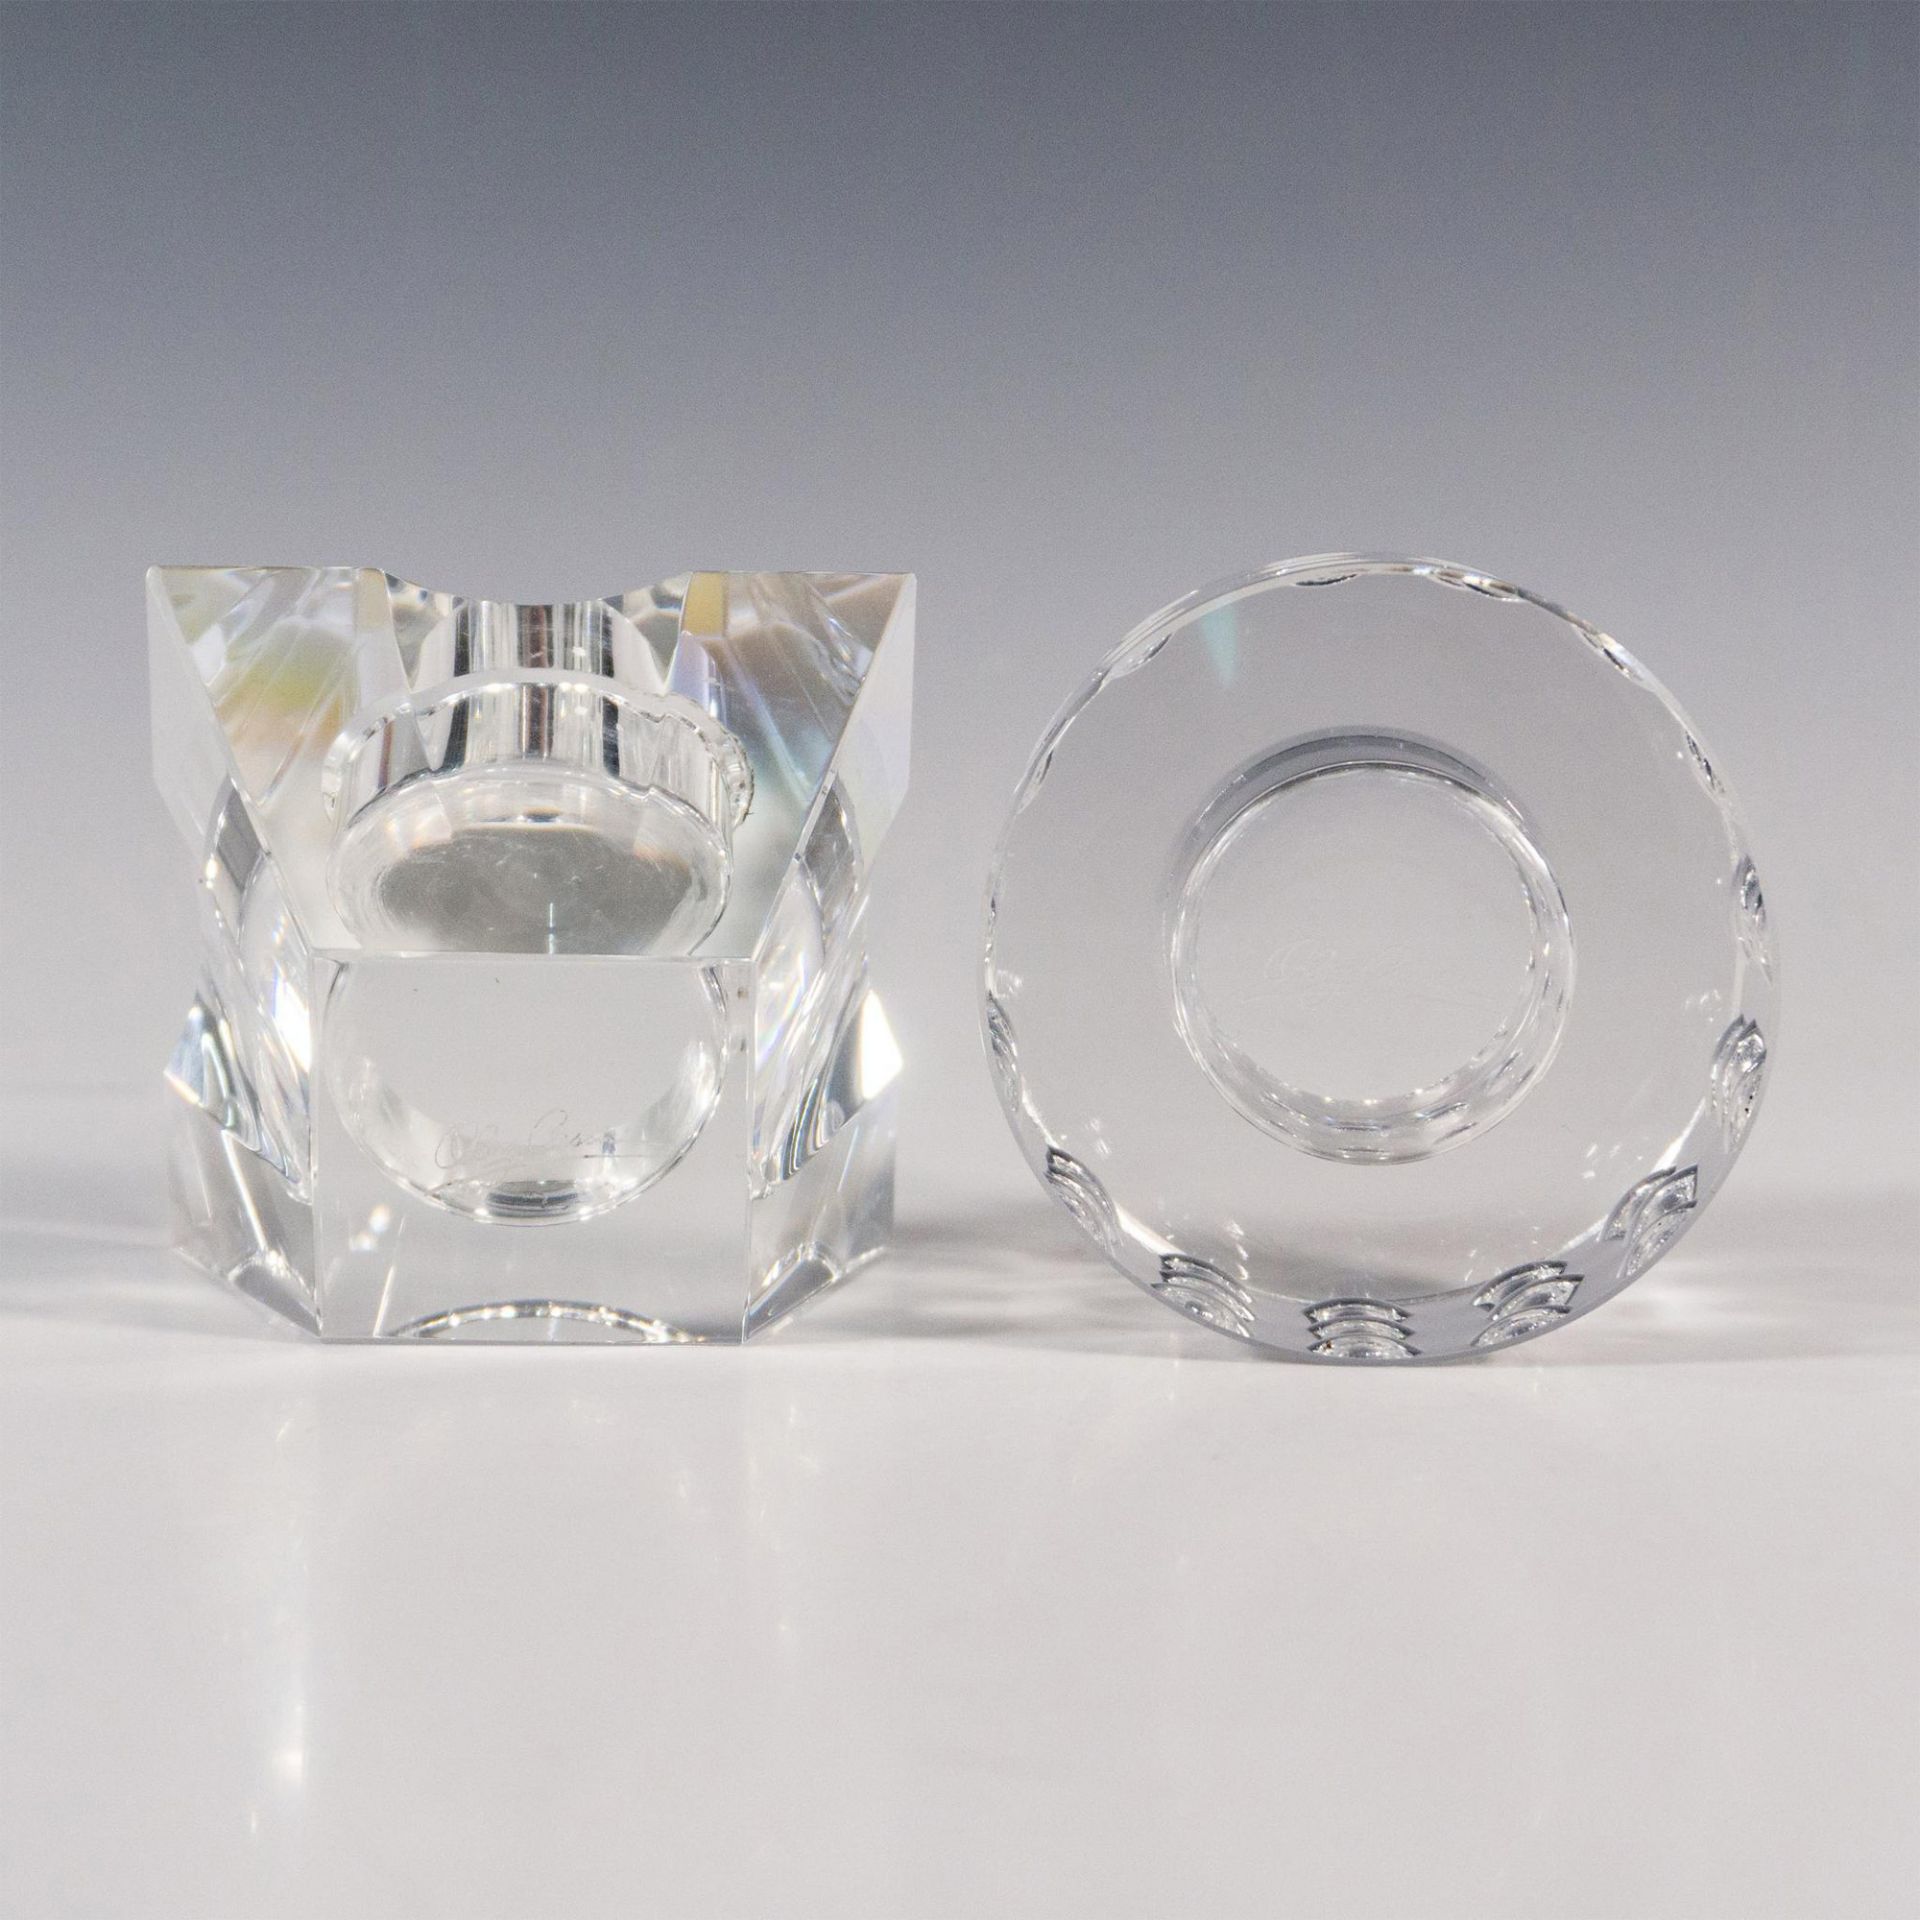 2pc Oleg Cassini Crystal Candle Holders, Bubble & Prism - Image 3 of 4